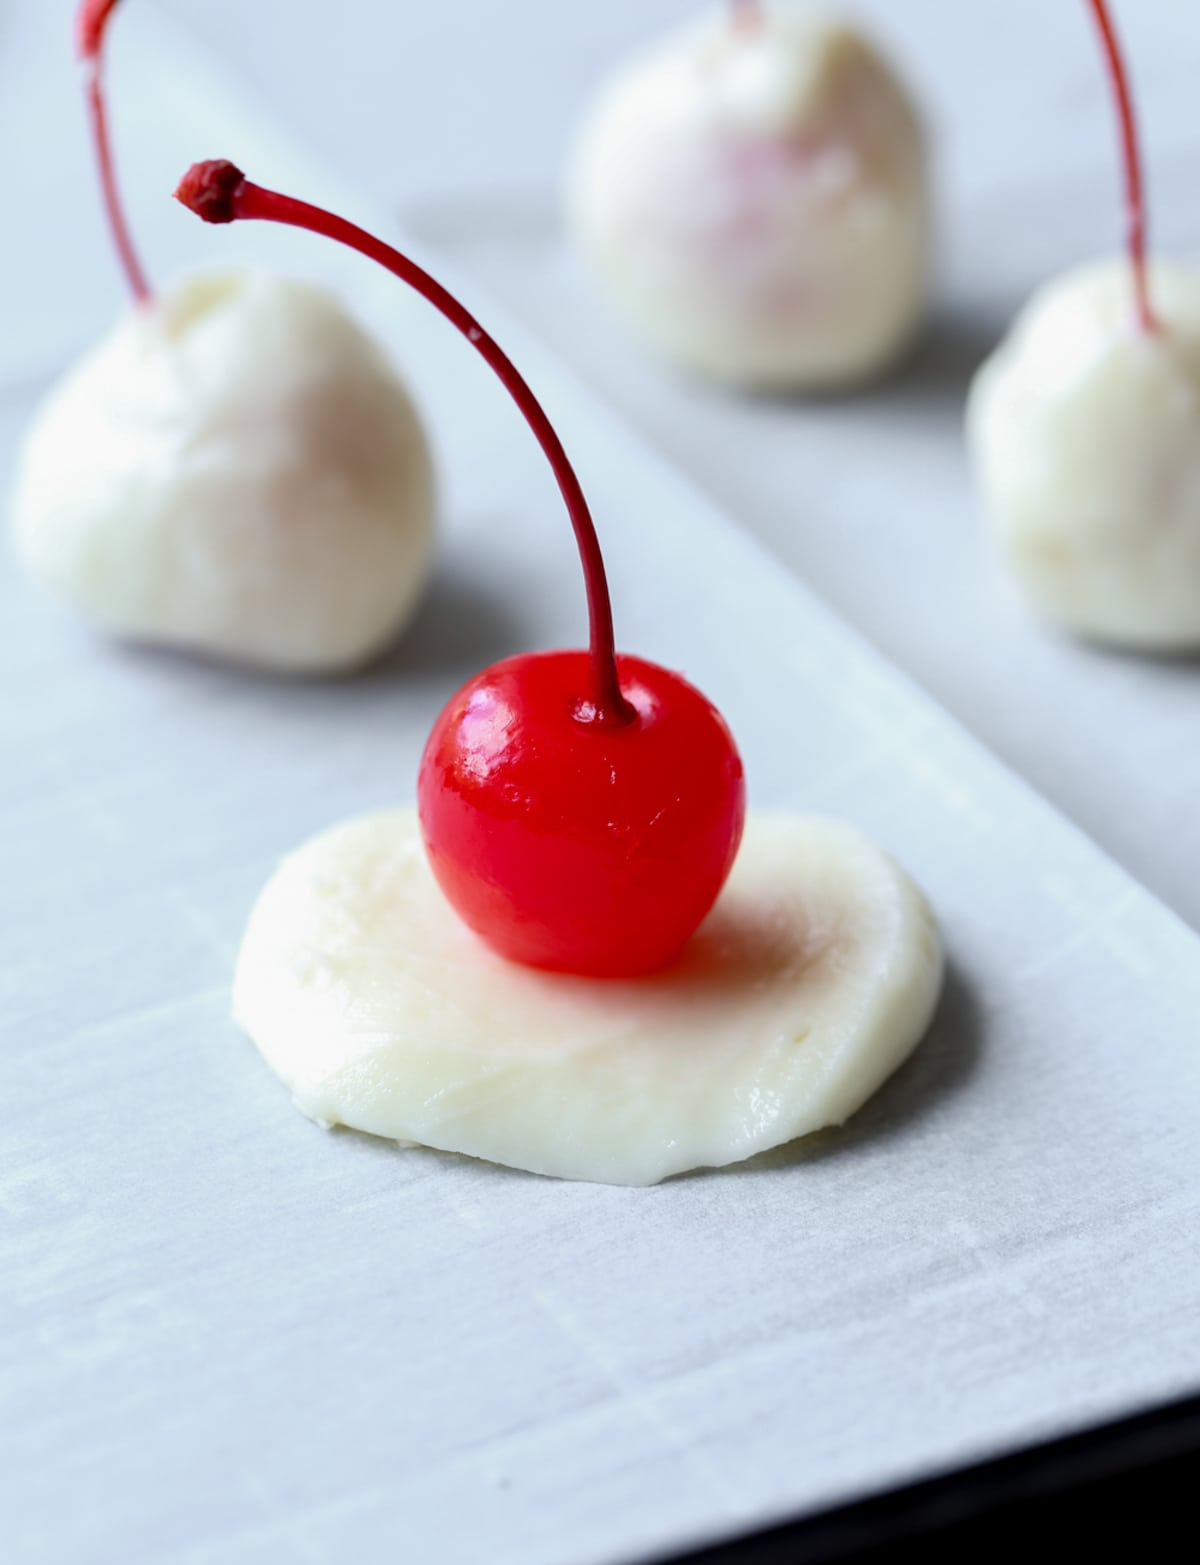 A red Maraschino cherry on a disc of fondant before being coated.